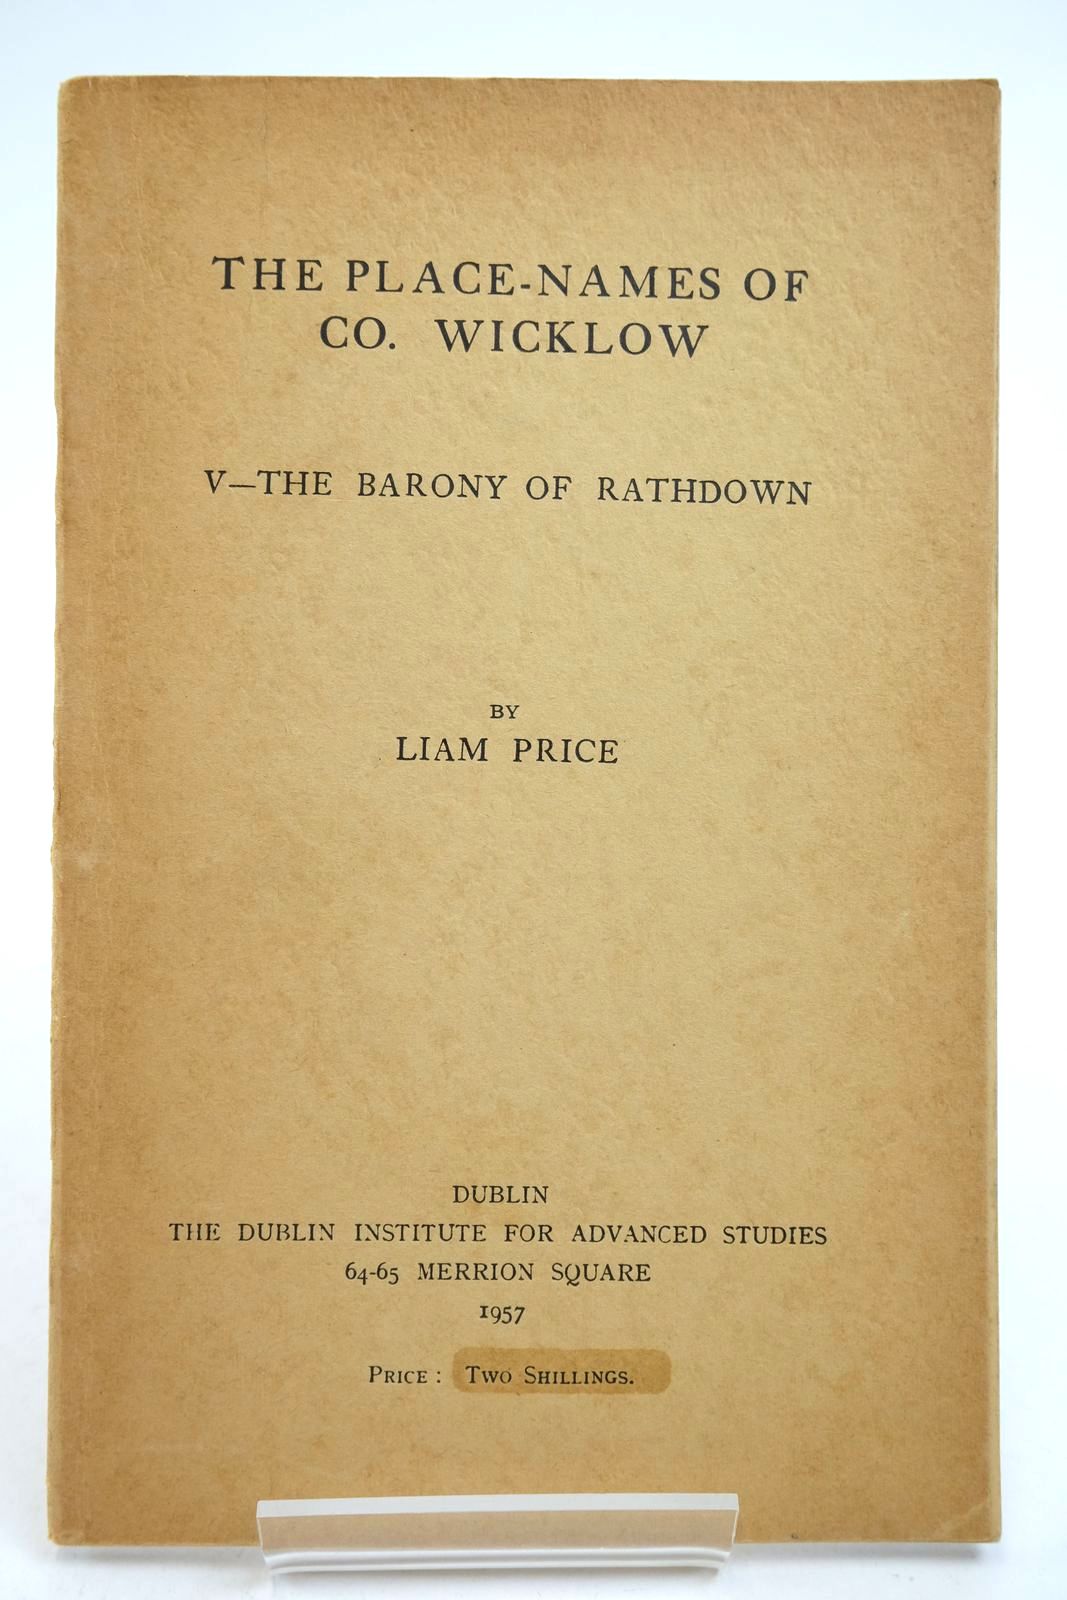 Photo of THE PLACE-NAMES OF CO. WICKLOW: V - THE BARONY OF RATHDOWN written by Price, Liam published by The Dublin Institute For Advanced Studies (STOCK CODE: 2140629)  for sale by Stella & Rose's Books